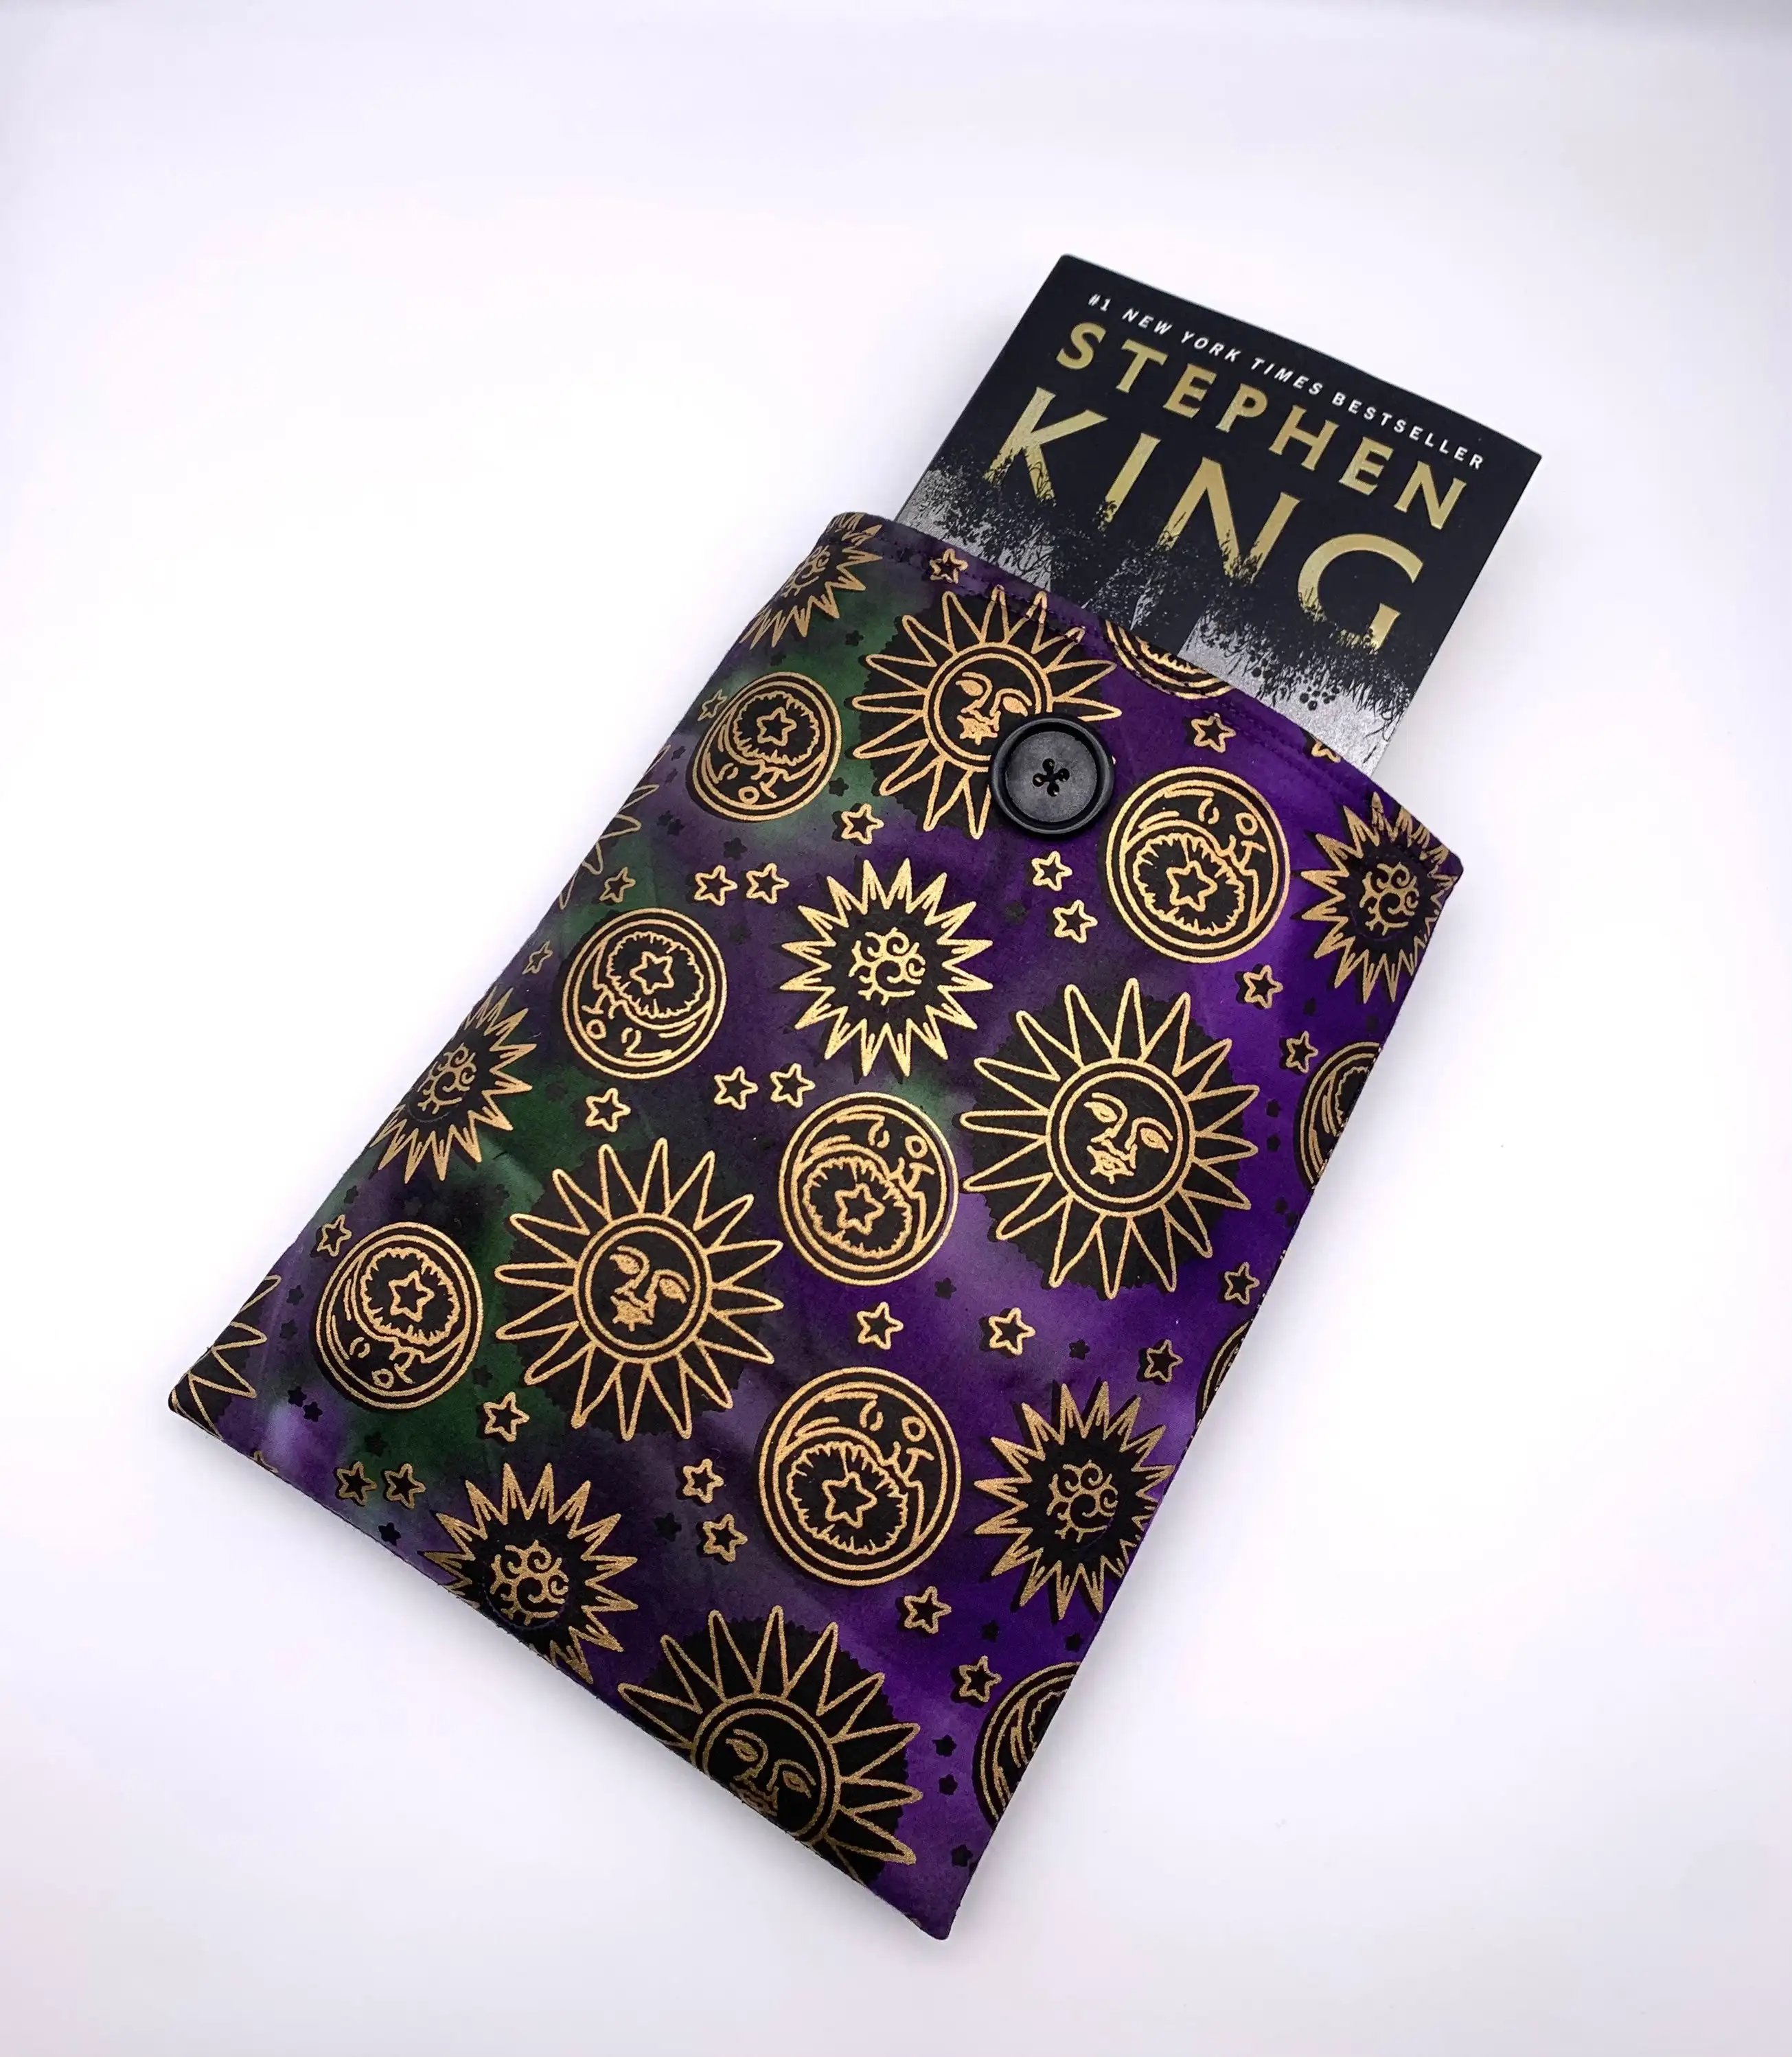 New Arrival boutique kindle sleeve custom book pocket button book cover exquisite print paperback book sleeve